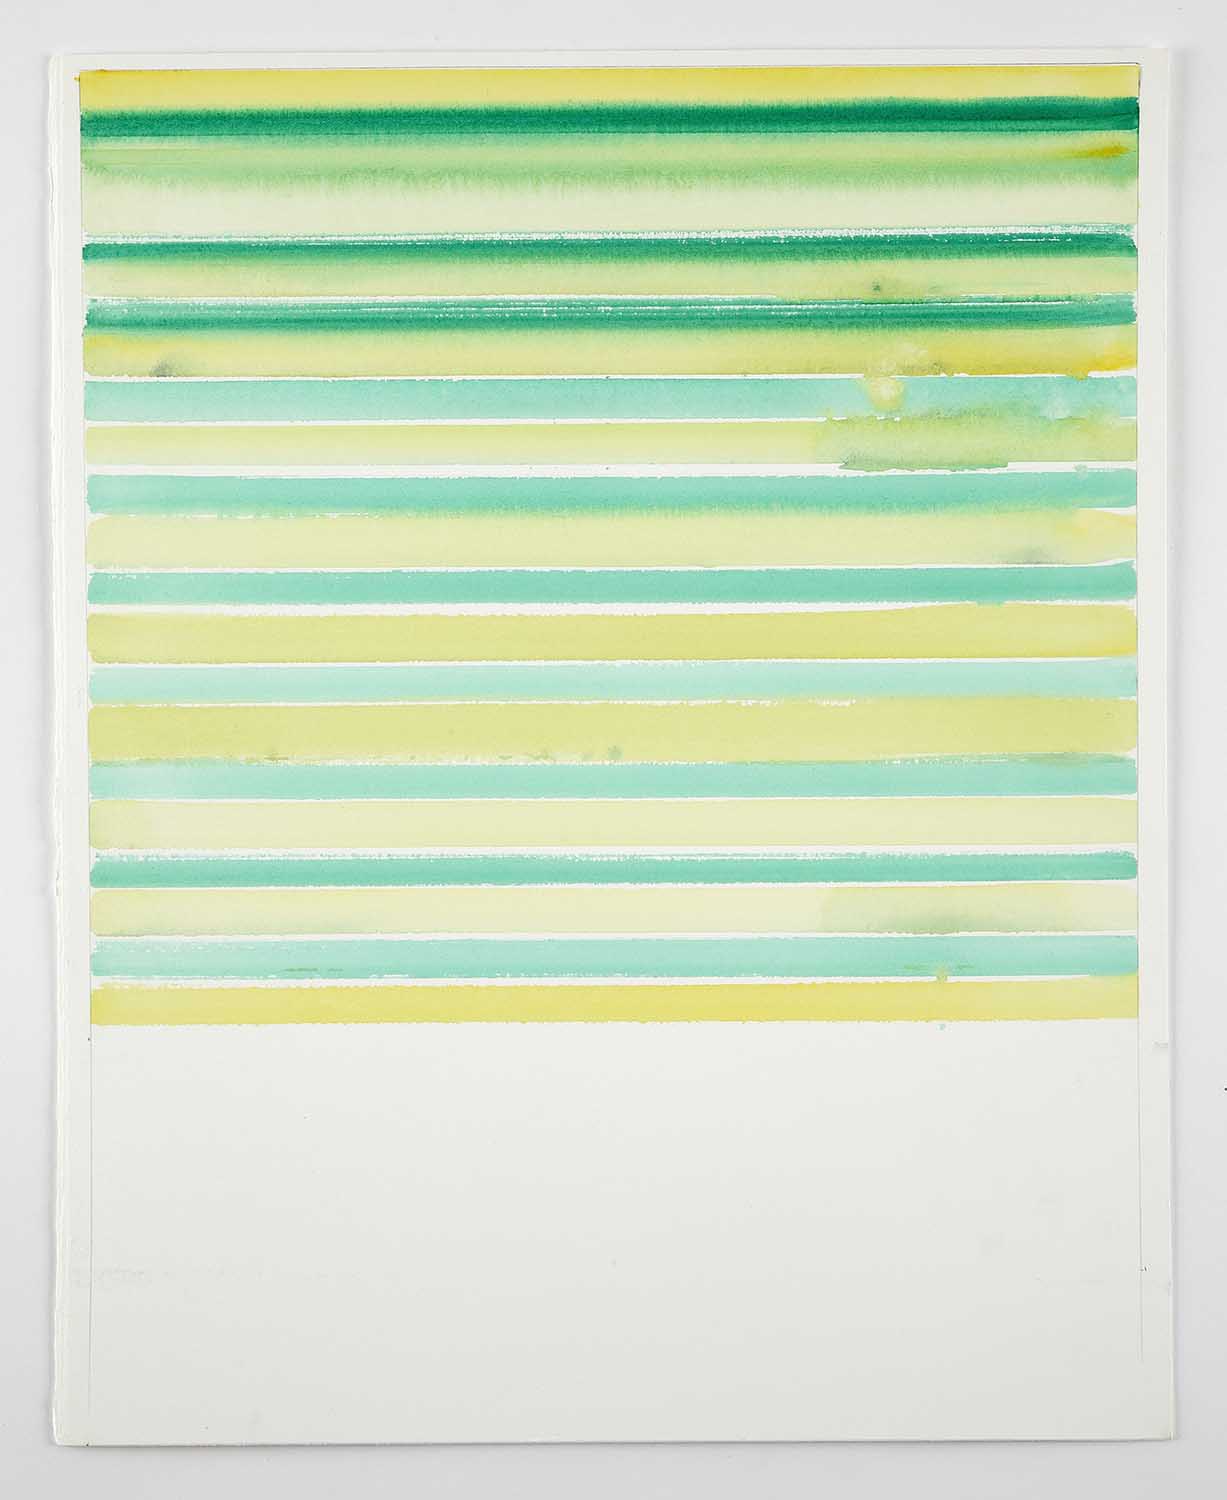 sue carlson green and yellow